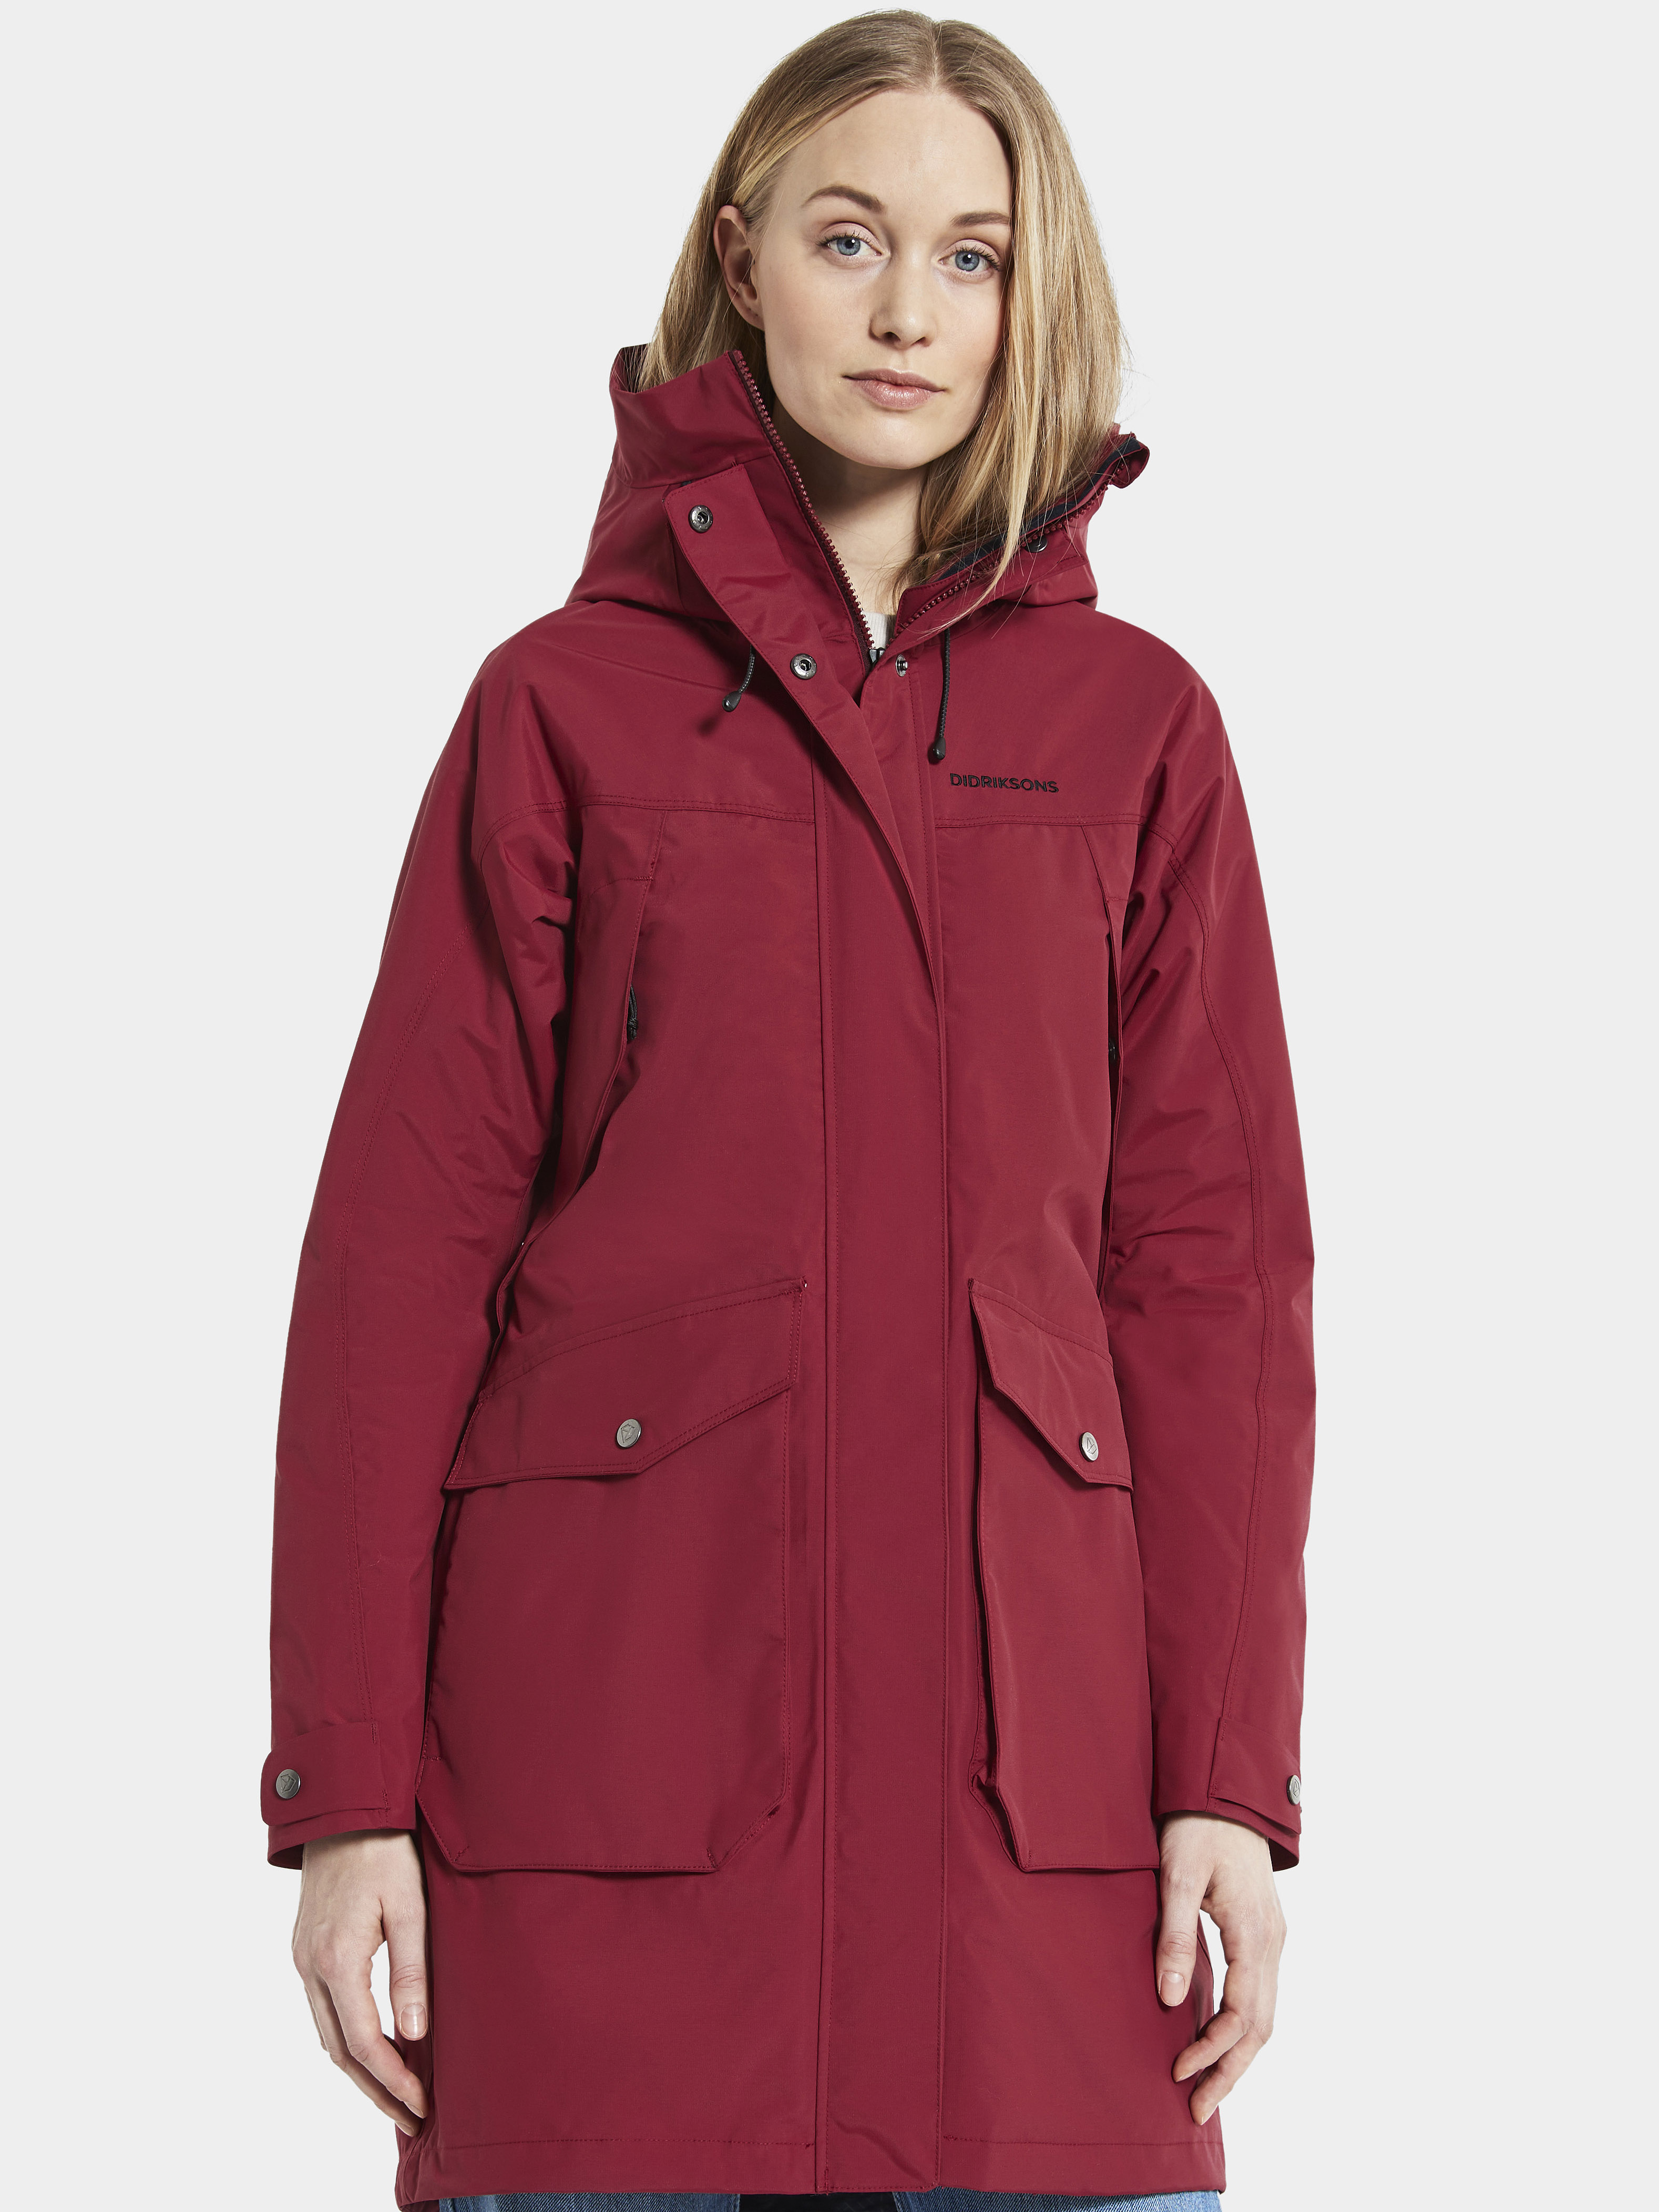 Thelma Women\'s Parka 8 Parka Buy Thelma Ruby Red | Ruby Red 8 Women\'s here | Outnorth